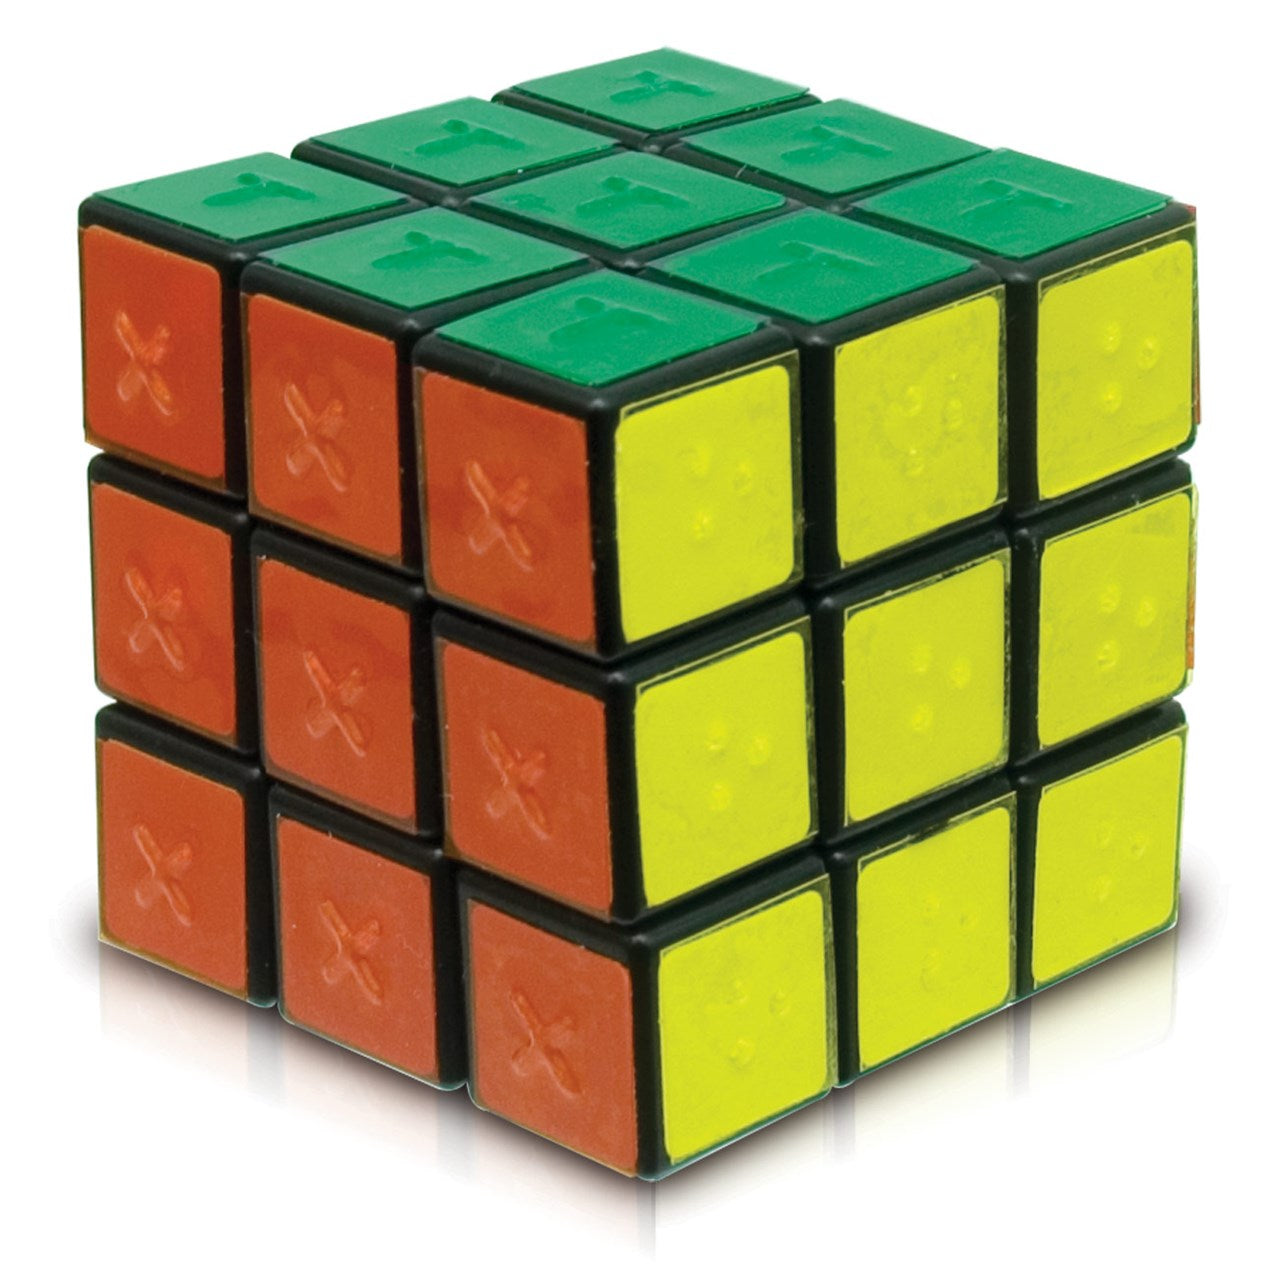 The Tactile Rubix Cube is a classic puzzle with a tactile twist! This blind-accessible version of the best-selling ultimate brain-teasing puzzle has been enhanced with tactile markings on all sides. In traditional play, the Tactile Rubix Cube is scrambled and then solved by twisting and turning it to realign the six matching colors. Challenge yourself and your friends to solve the puzzle just by touch. 